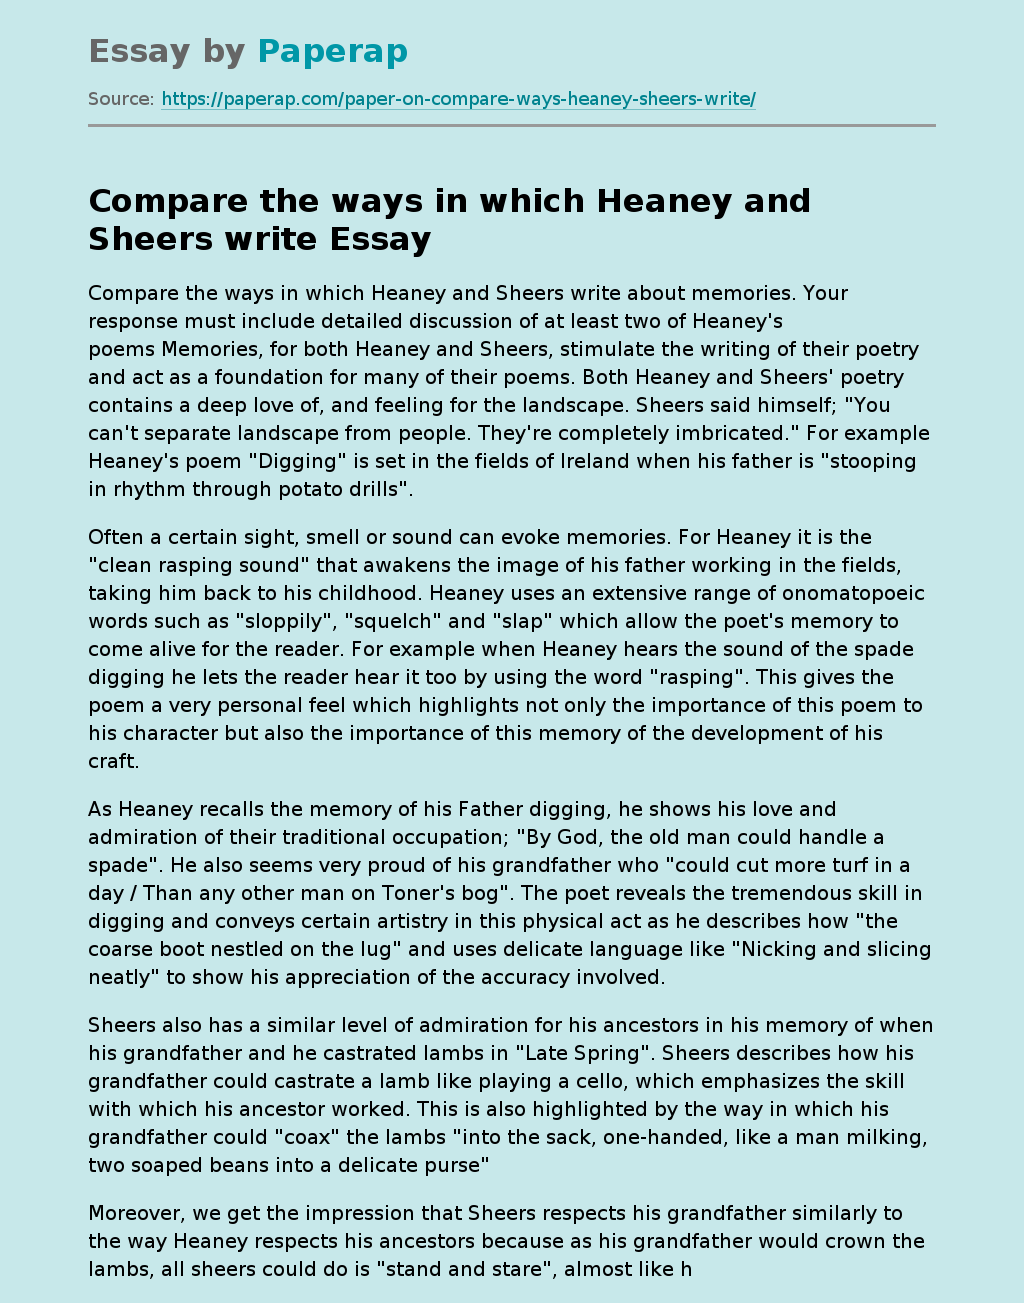 Compare the Ways in Which Heaney and Sheers Write